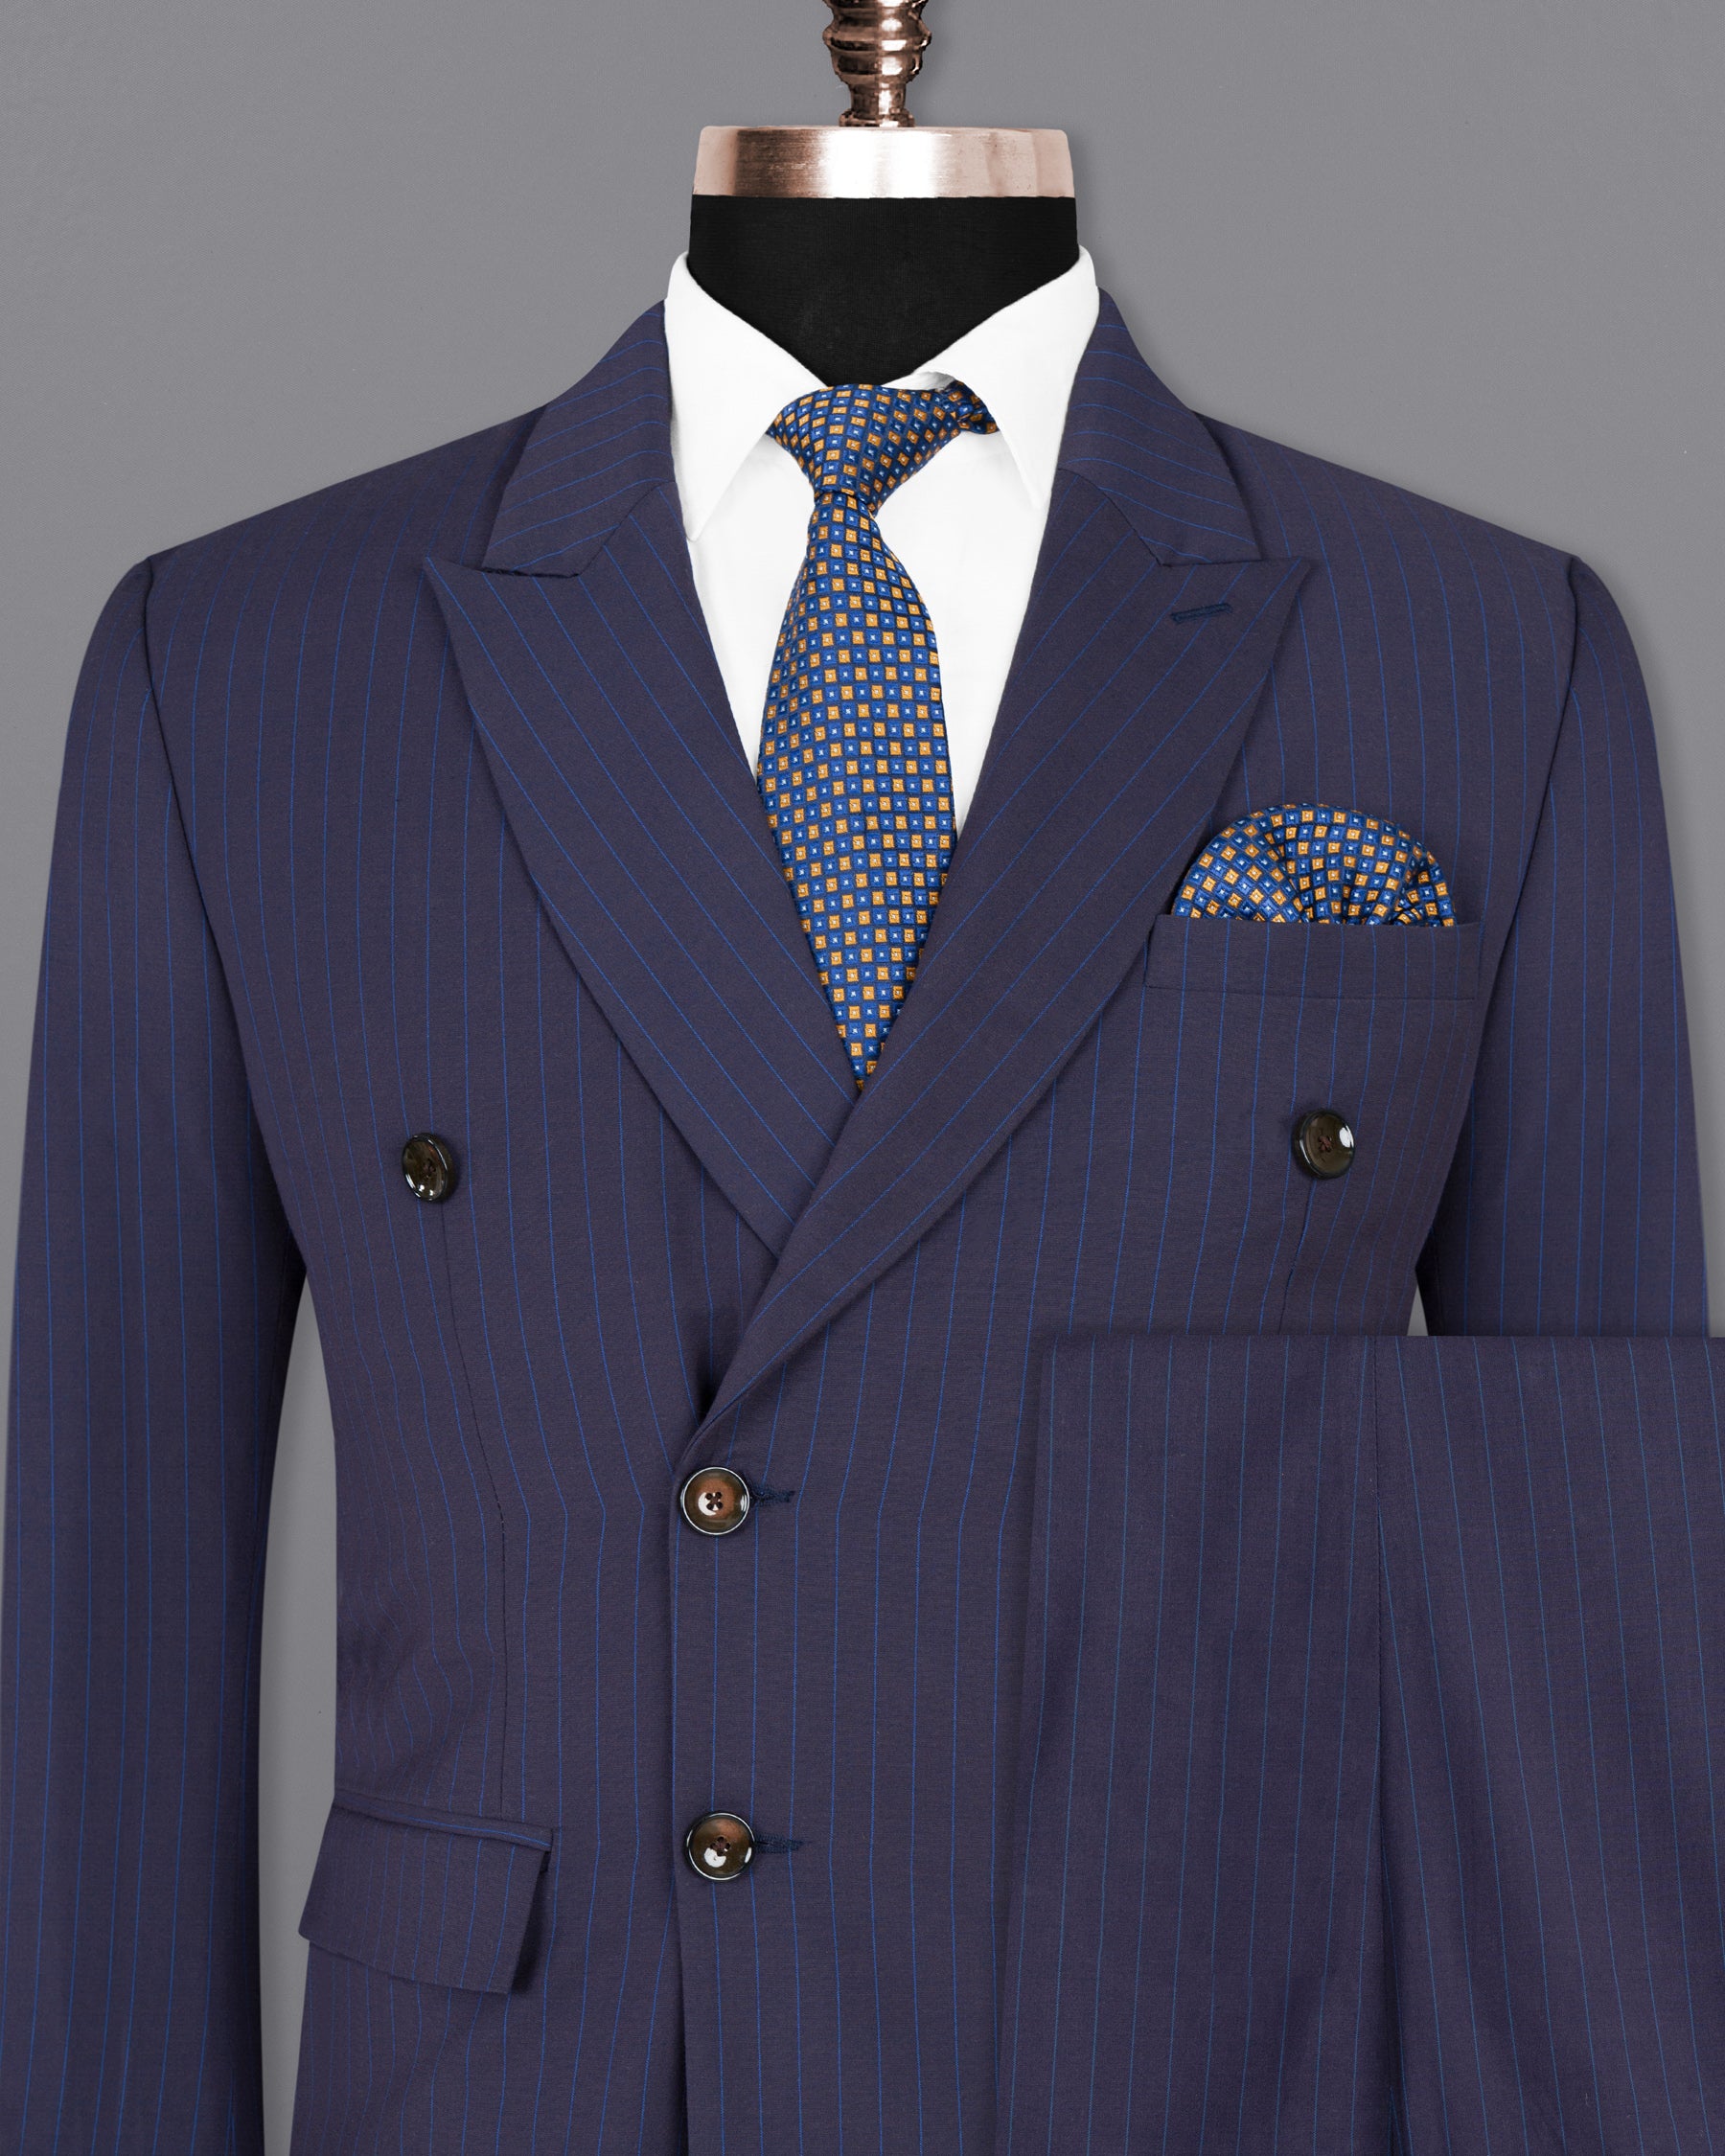 Tuna Blue Striped Double-Breasted Wool Rich Suit ST1388-DB-36, ST1388-DB-38, ST1388-DB-40, ST1388-DB-42, ST1388-DB-44, ST1388-DB-46, ST1388-DB-48, ST1388-DB-50, ST1388-DB-52, ST1388-DB-54, ST1388-DB-56, ST1388-DB-58, ST1388-DB-60